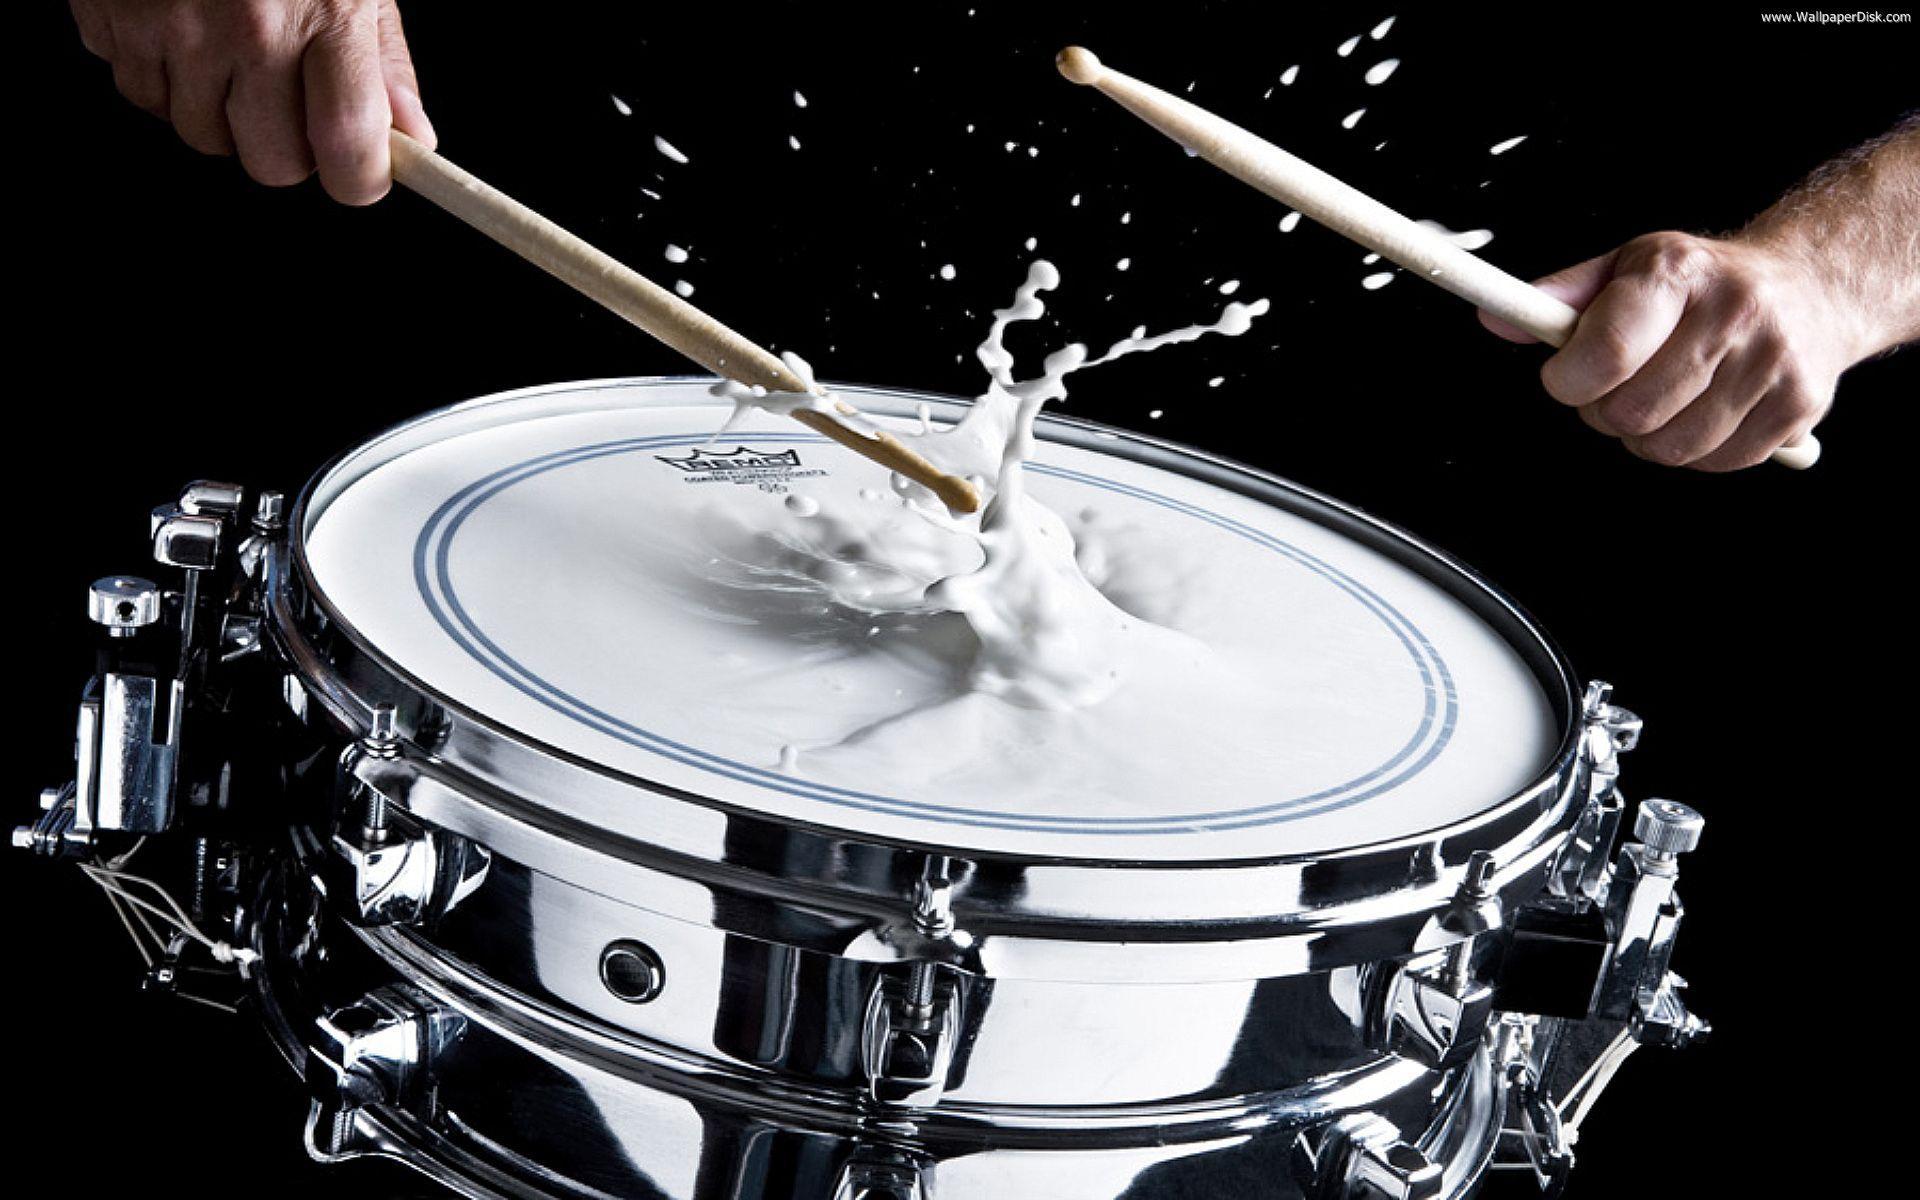 Drum Sticks Hitting Snare Drum with Splashing Water on Black Background  Under Studio Lighting Black and White Close Up Stock Photo  Image of  snare contrast 199351070